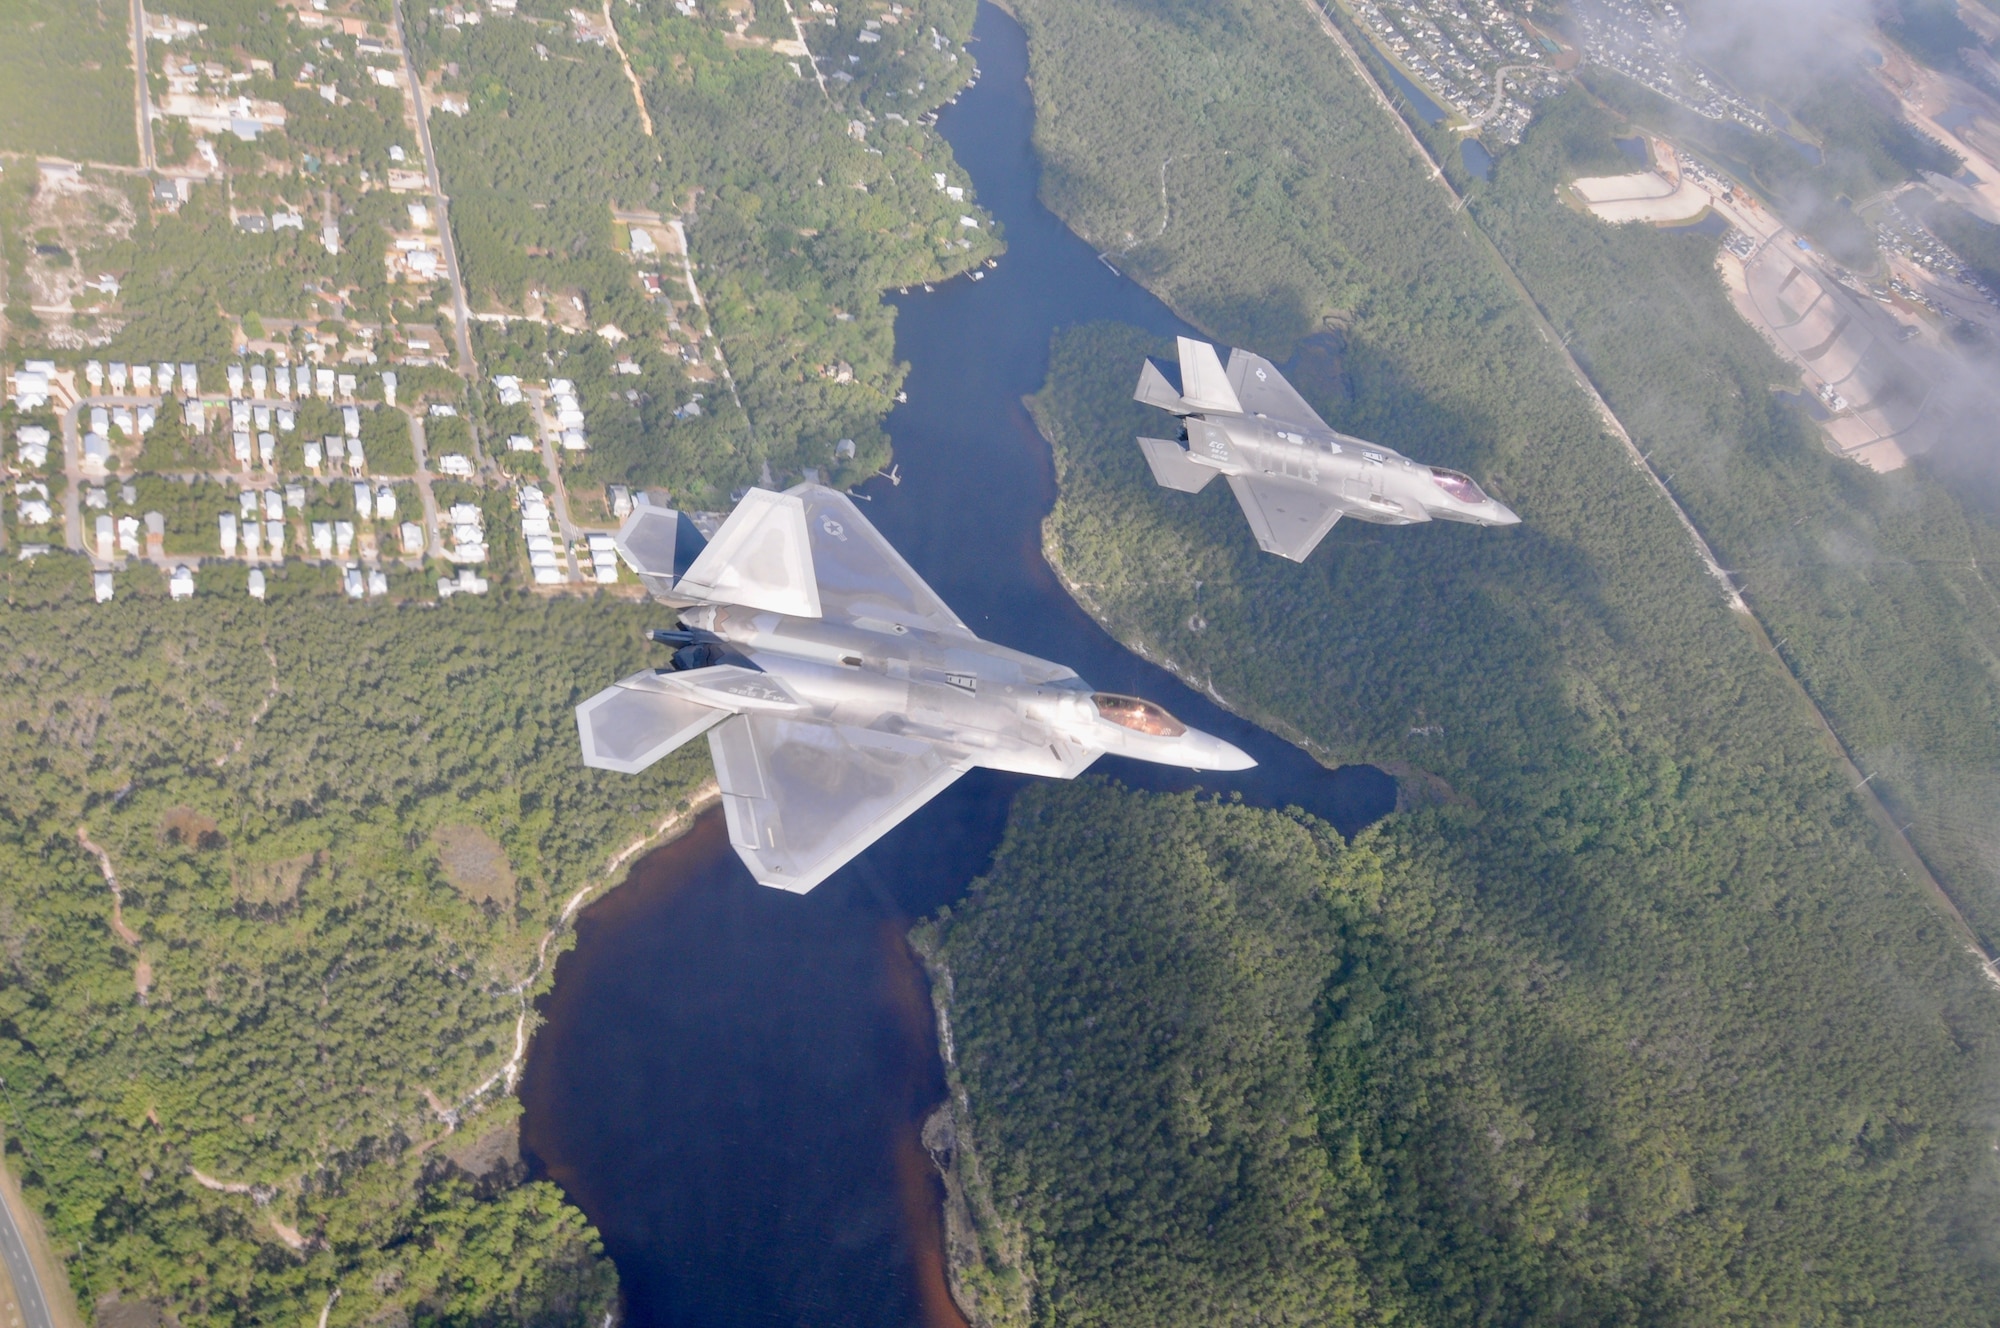 A F-22 Raptor from the 325th Fighter Wing flies alongside a F-35 Lightning II from the 33rd Fighter Wing over the Emerald Coast. The fifth generation fighter jets flew together in a rare dissimilar formation to salute healthcare workers, first responders and other essential employees May 15, 2020. (U.S. Air Force photo by 1st Lt Savanah Bray)